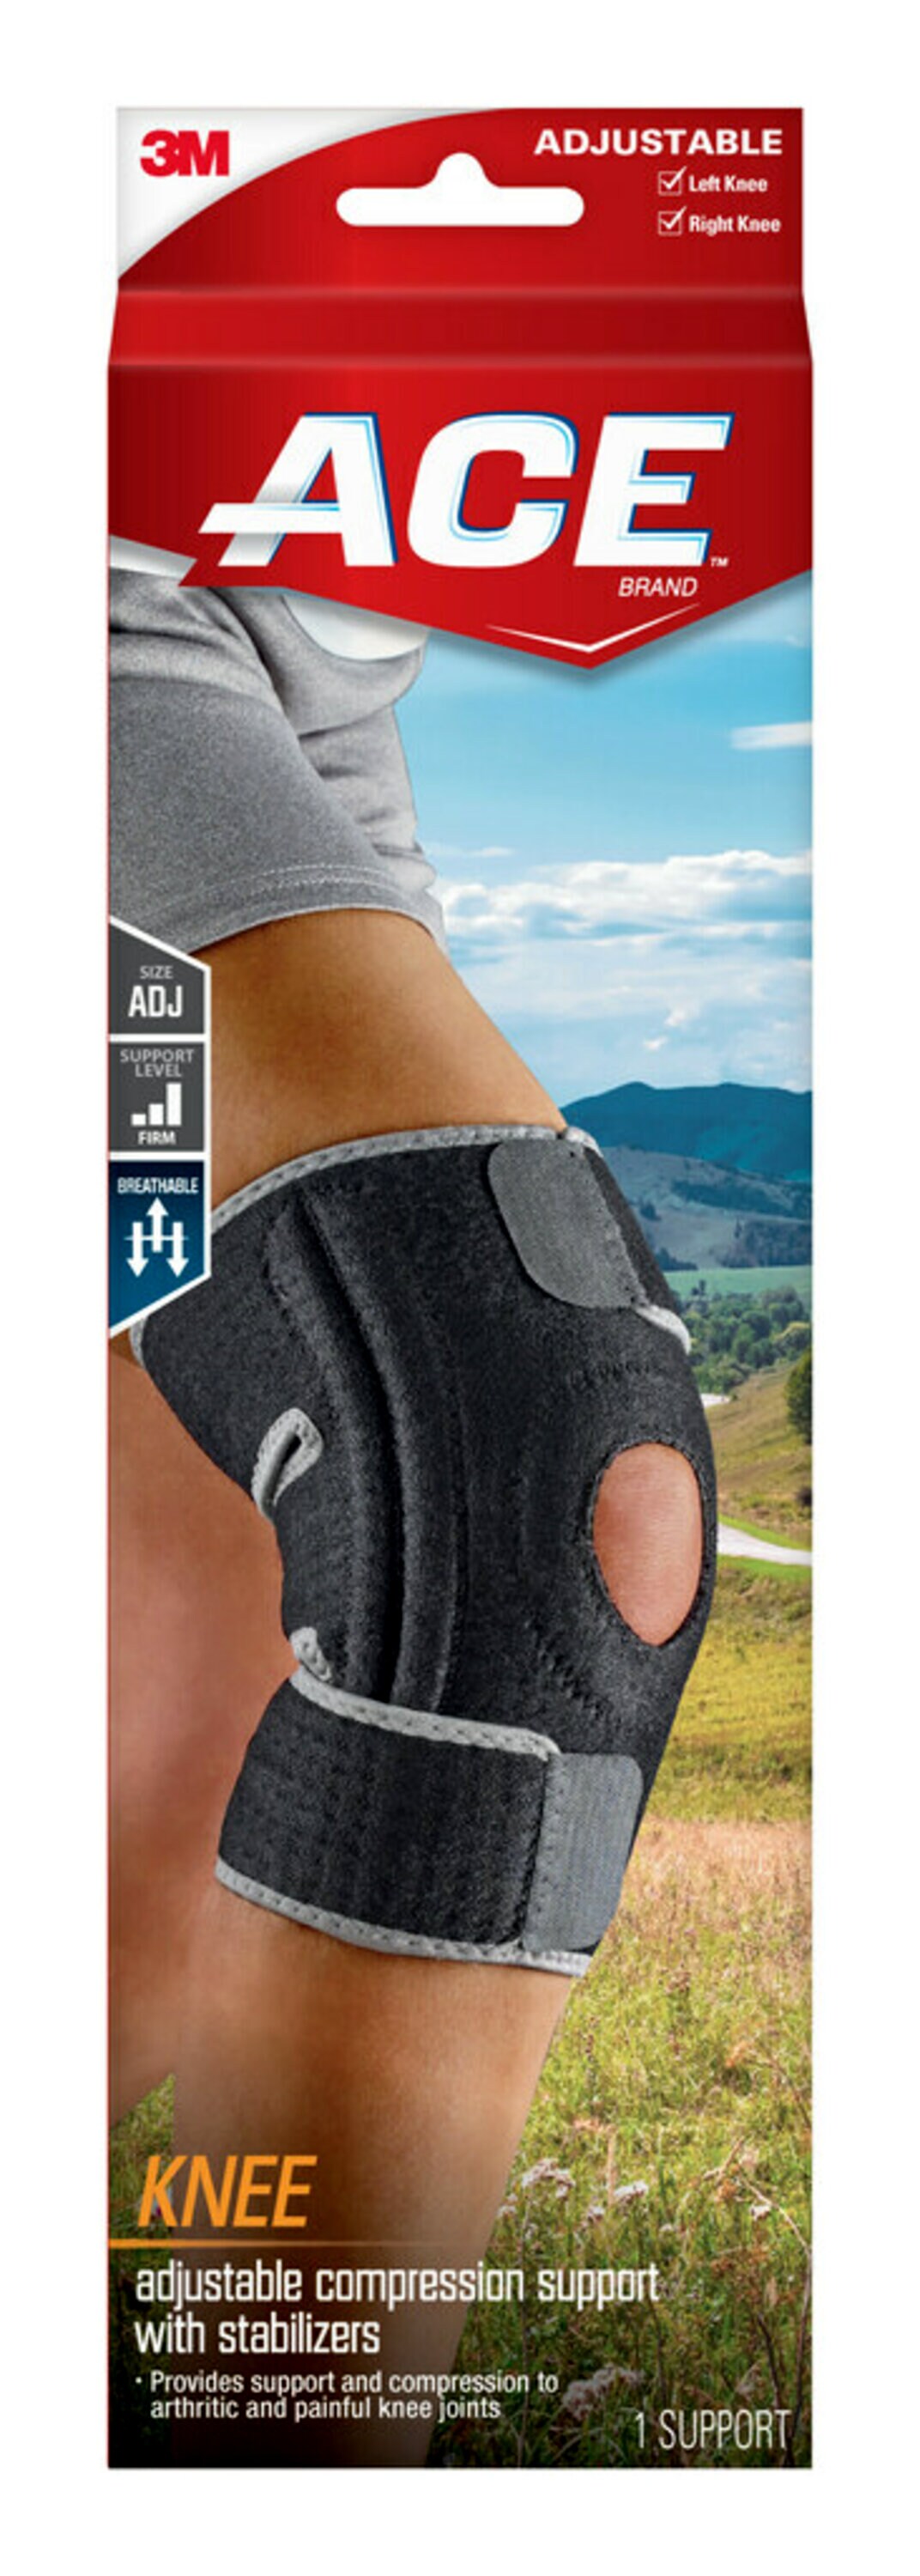 ACE Brand Adjustable Compression Knee Support with Stabilizers, Black/Gray – One Size - image 1 of 12